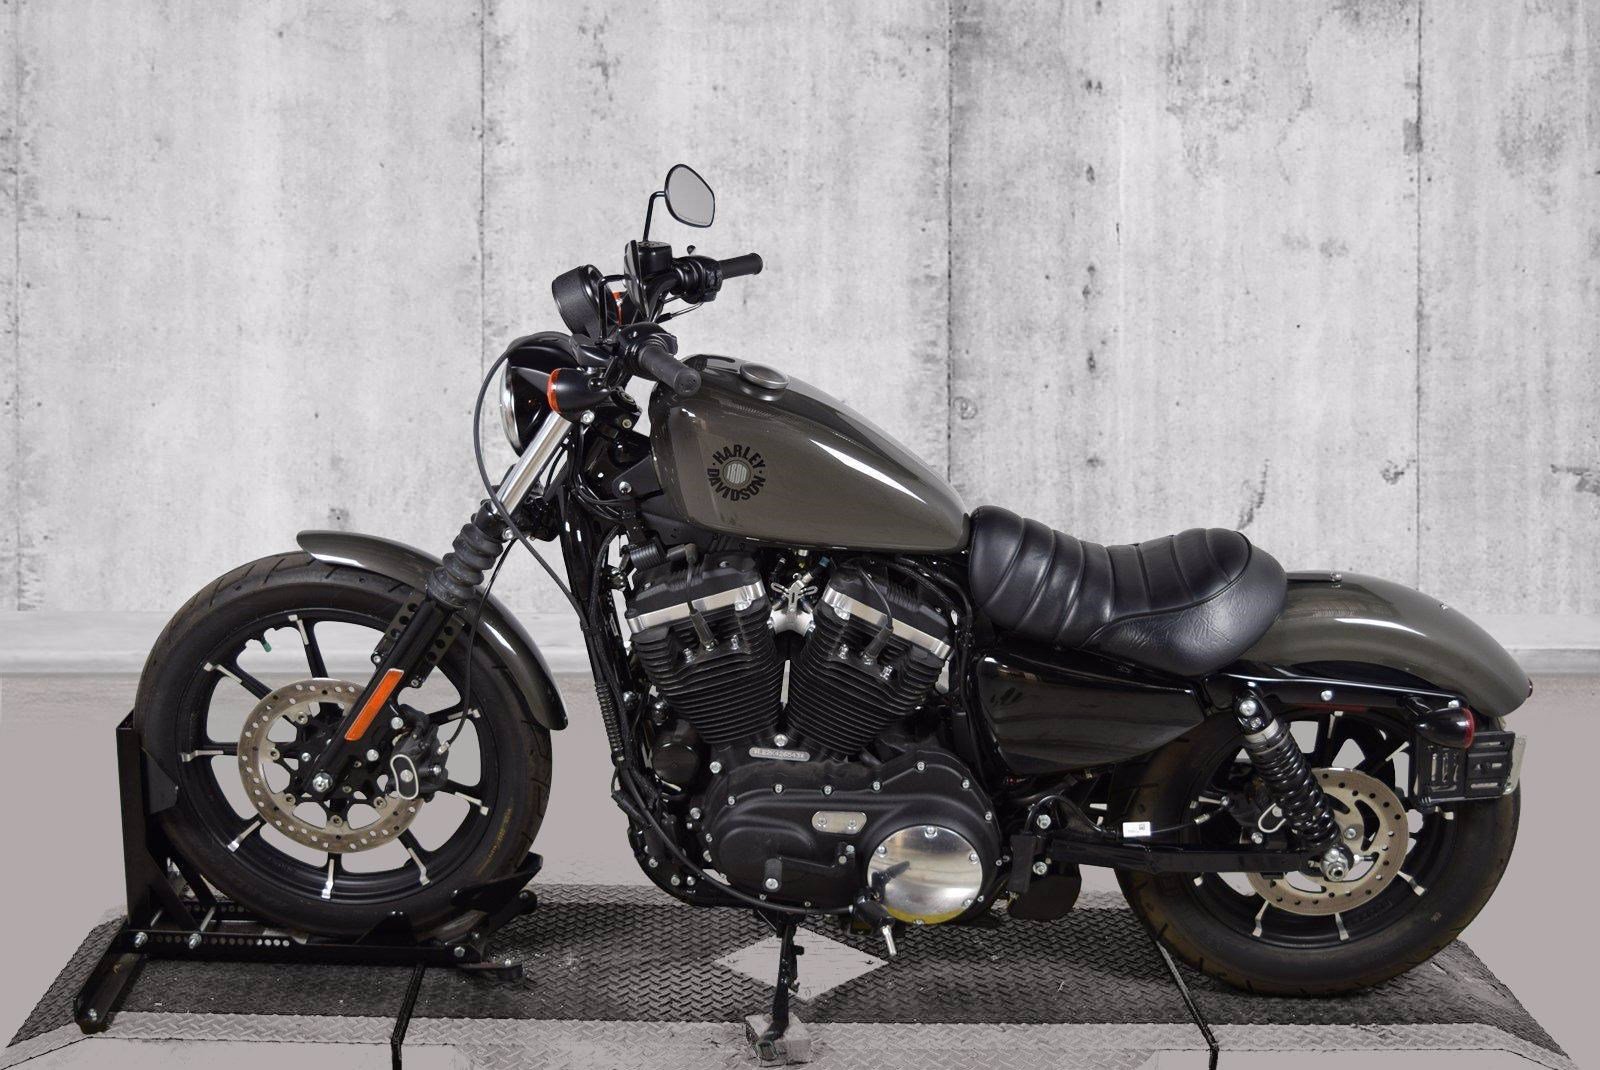 Pre-Owned 2019 Harley-Davidson Sportster Iron 883 XL883N ...